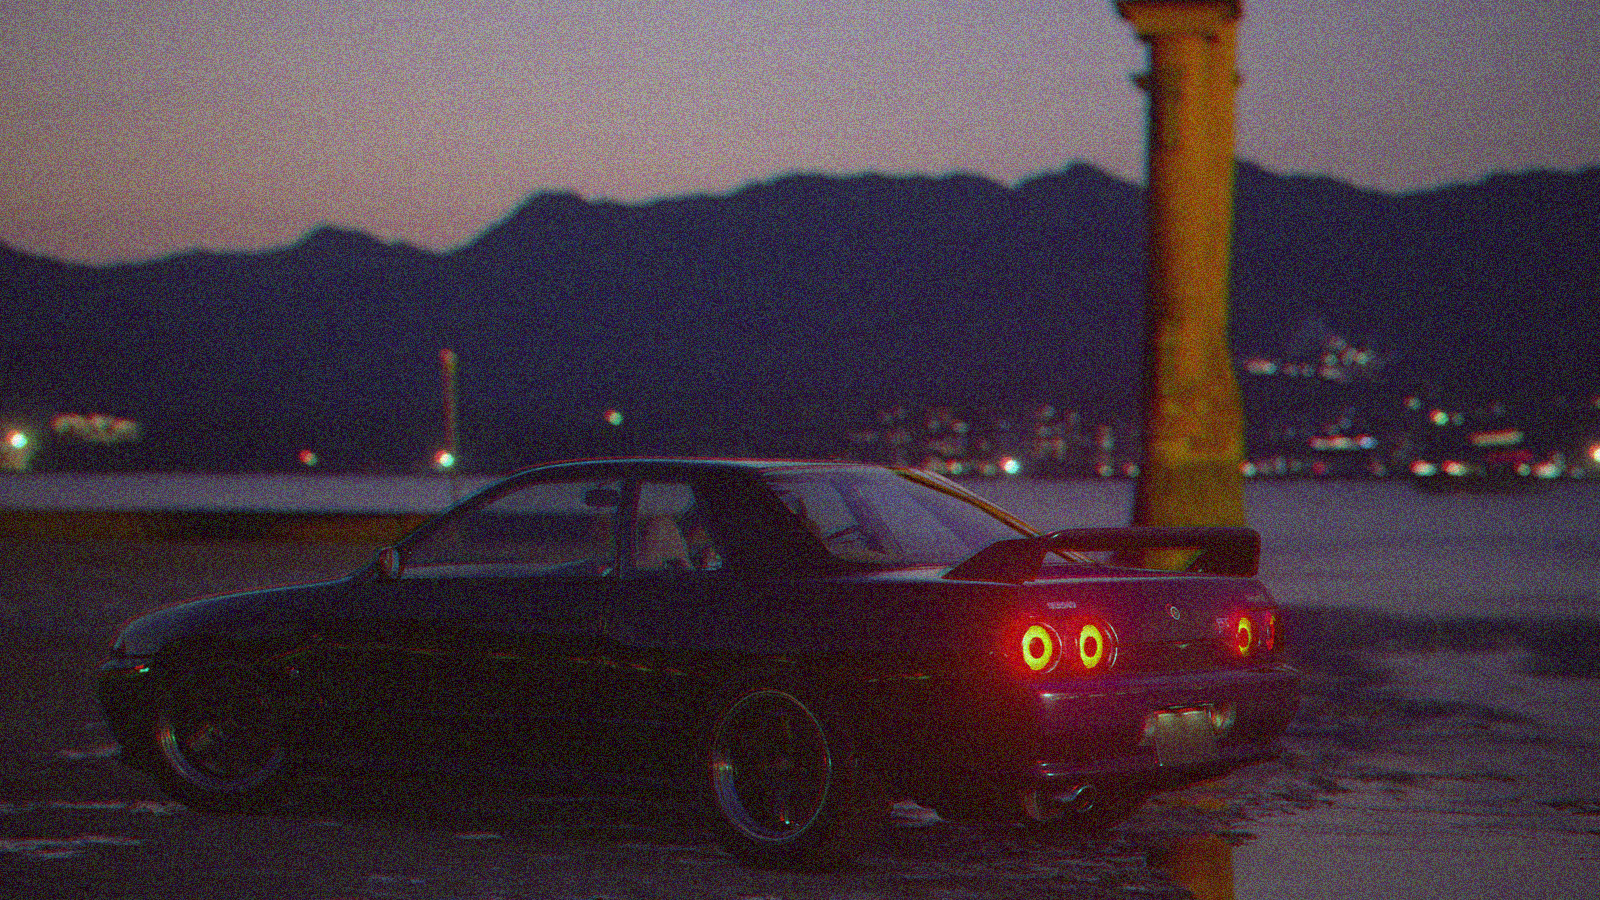 Jdm Aesthetic Wallpaper 4k Jdm Aesthetic Wallpapers Abstract Wallpapers